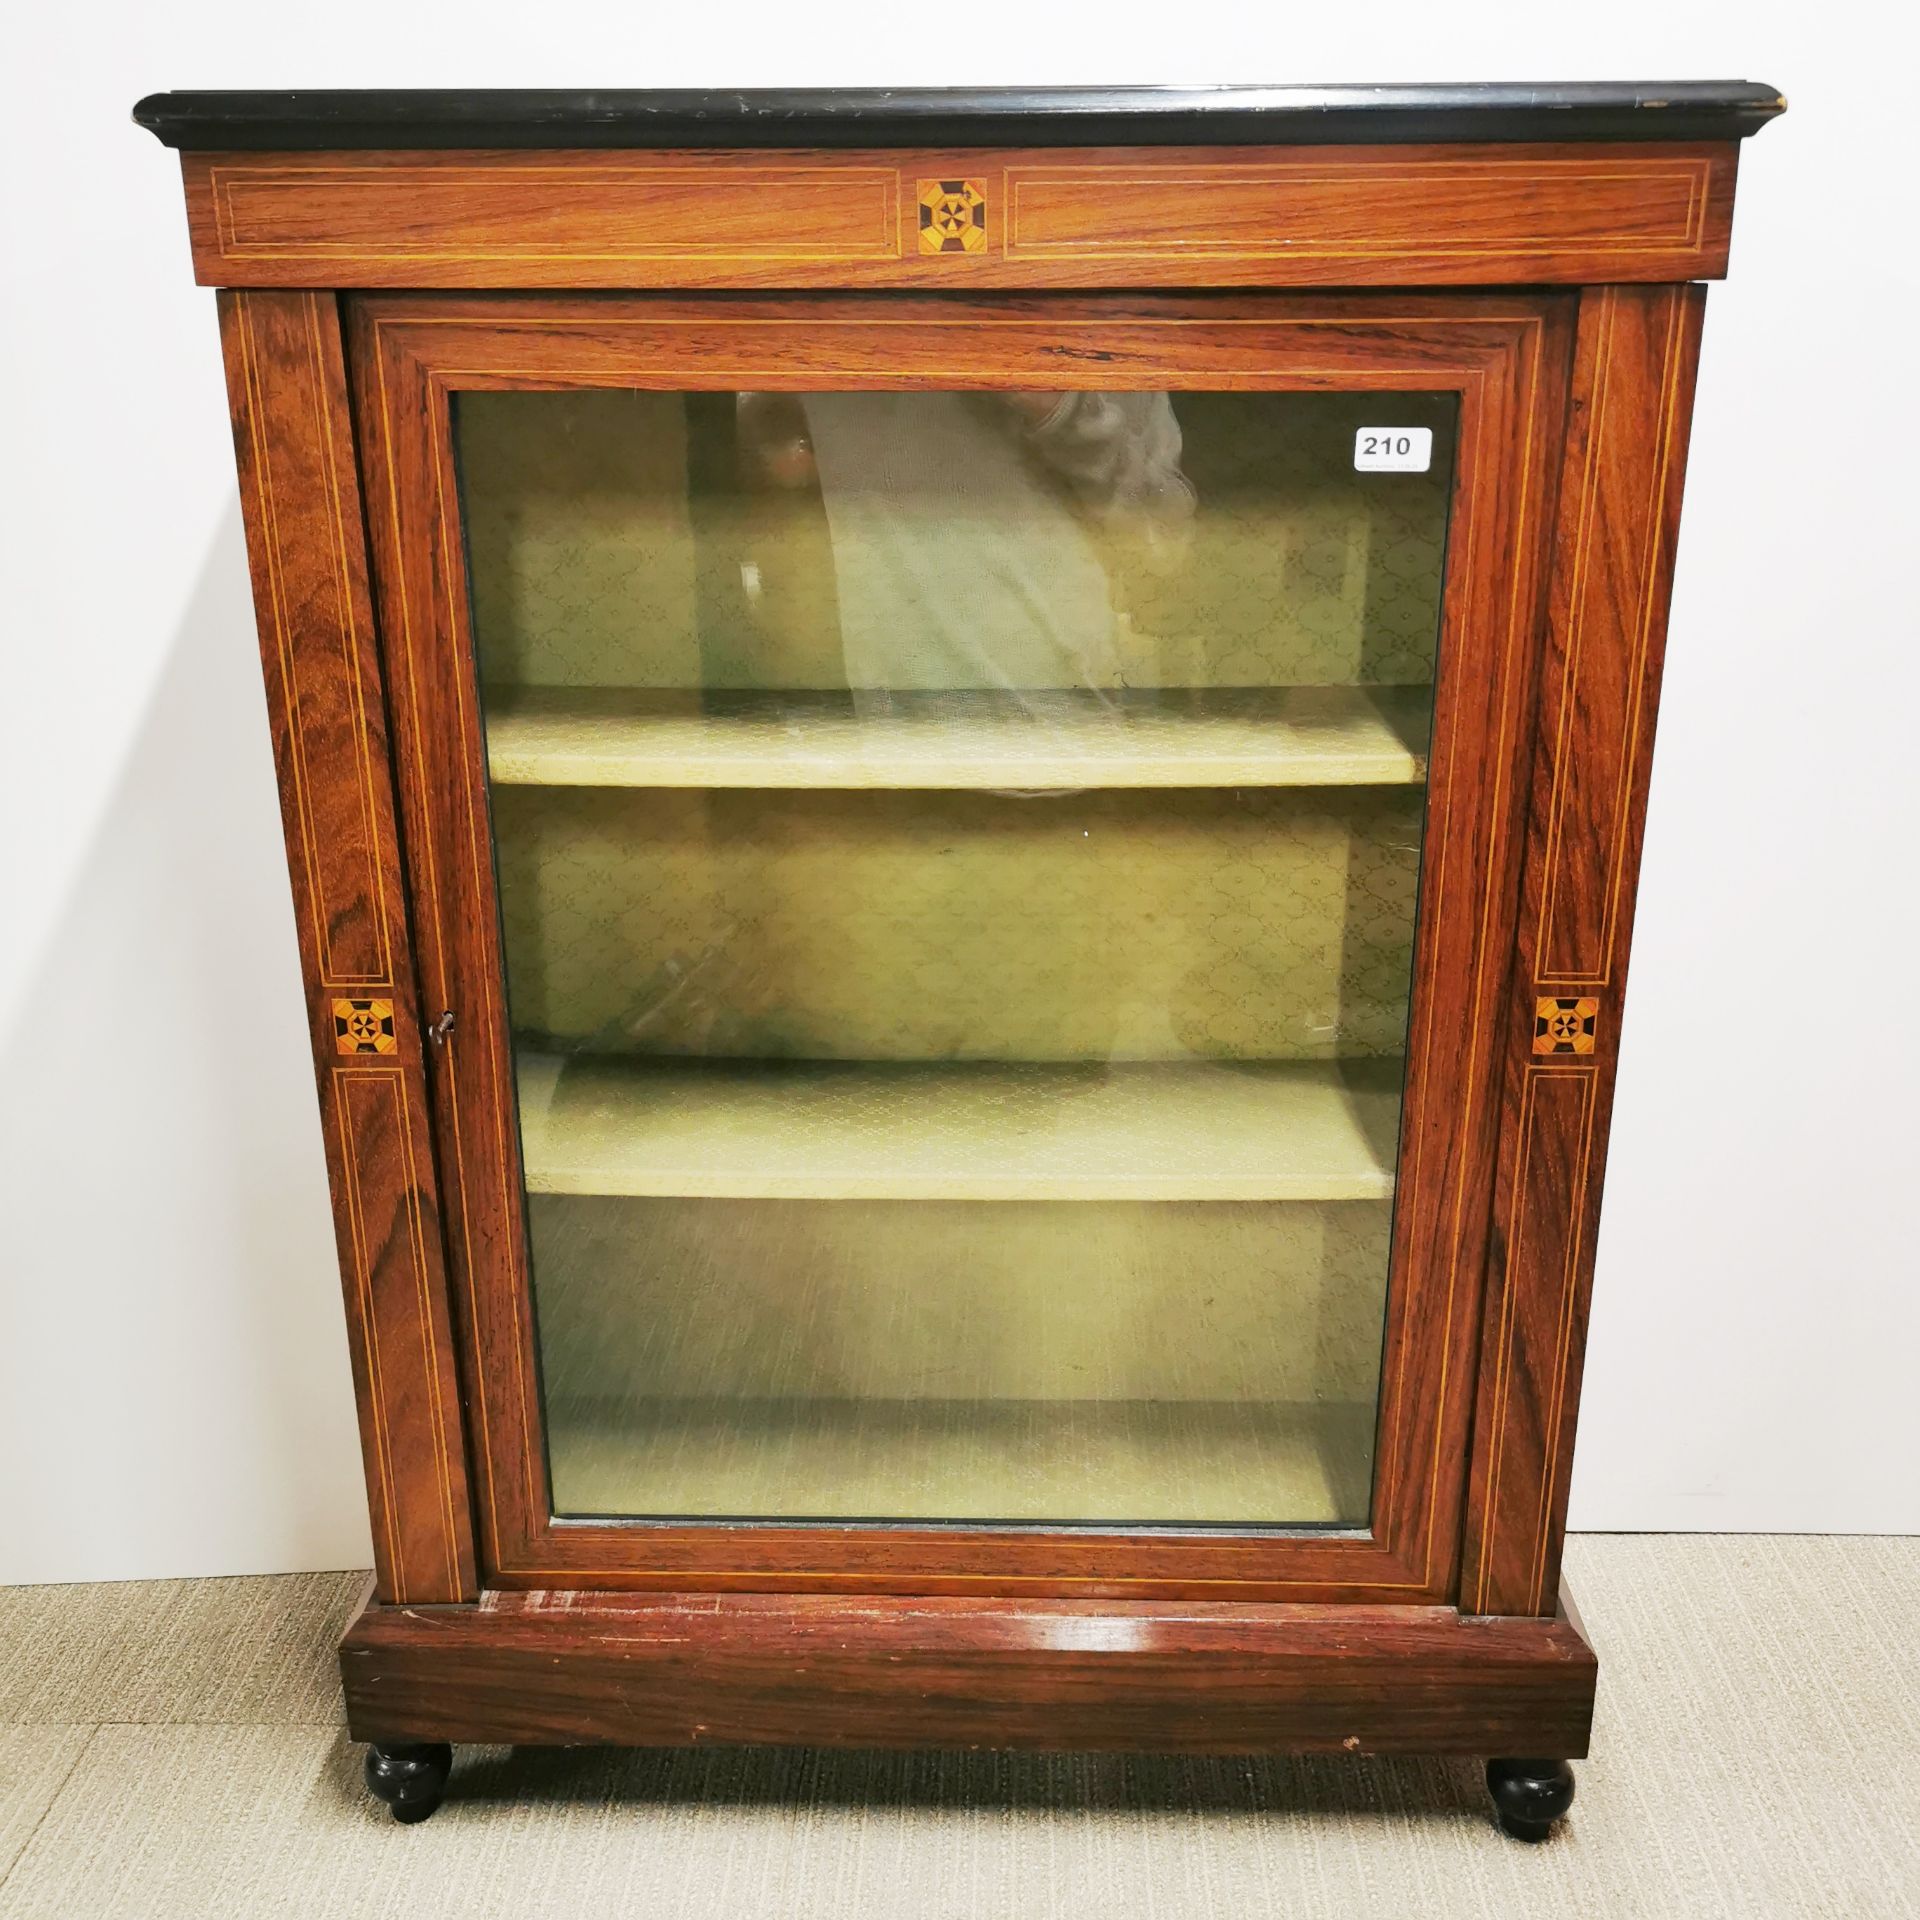 A 20th C stained mahogany display cabinet with green fitted interior and geometric inlaid - Image 2 of 4